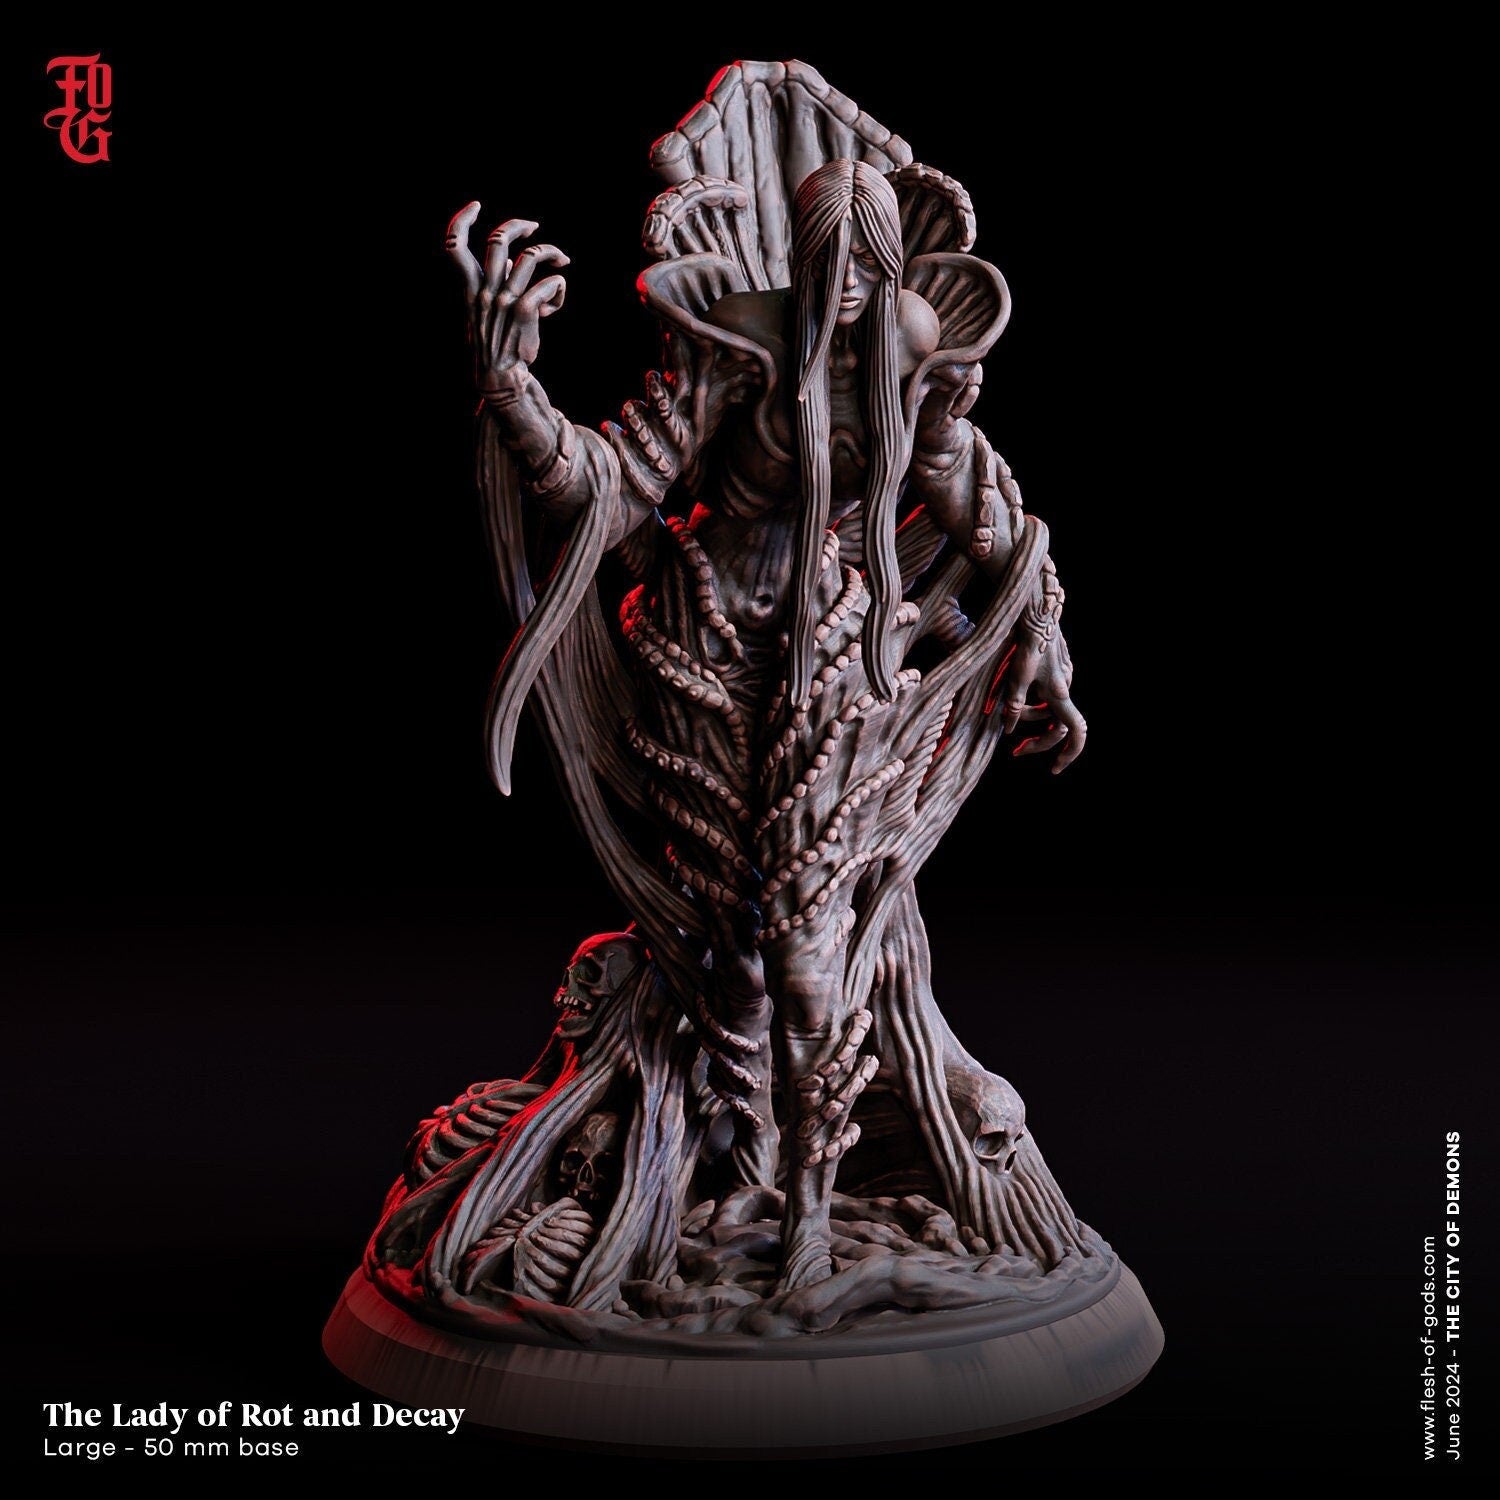 Lady of Rot and Decay Miniature | Horror Fantasy Figure for Tabletop RPGs | 50mm Base - Plague Miniatures